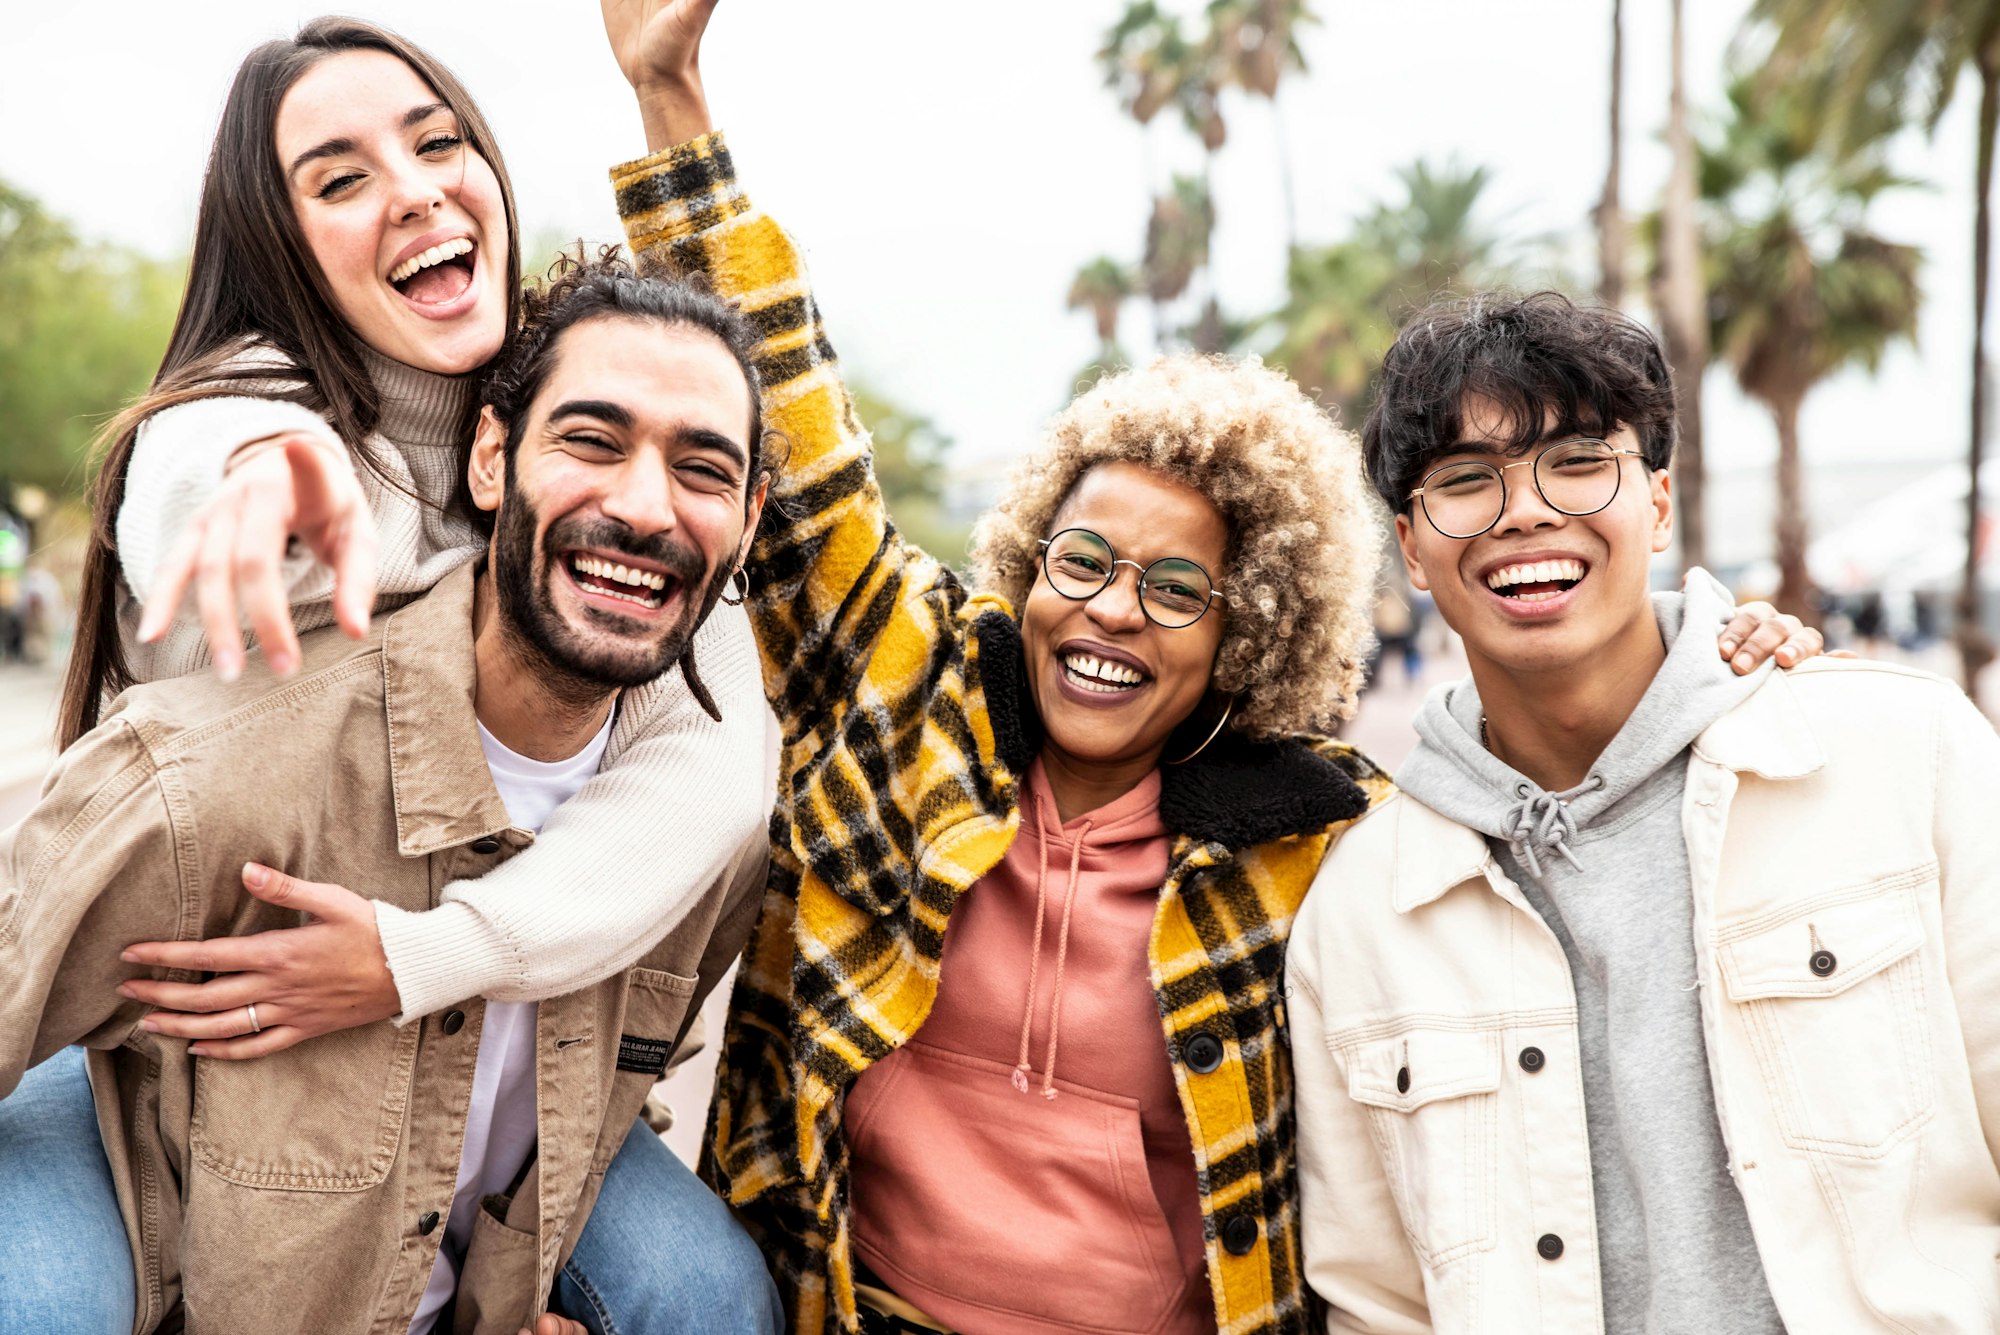 Multiracial group of young people smiling together at camera